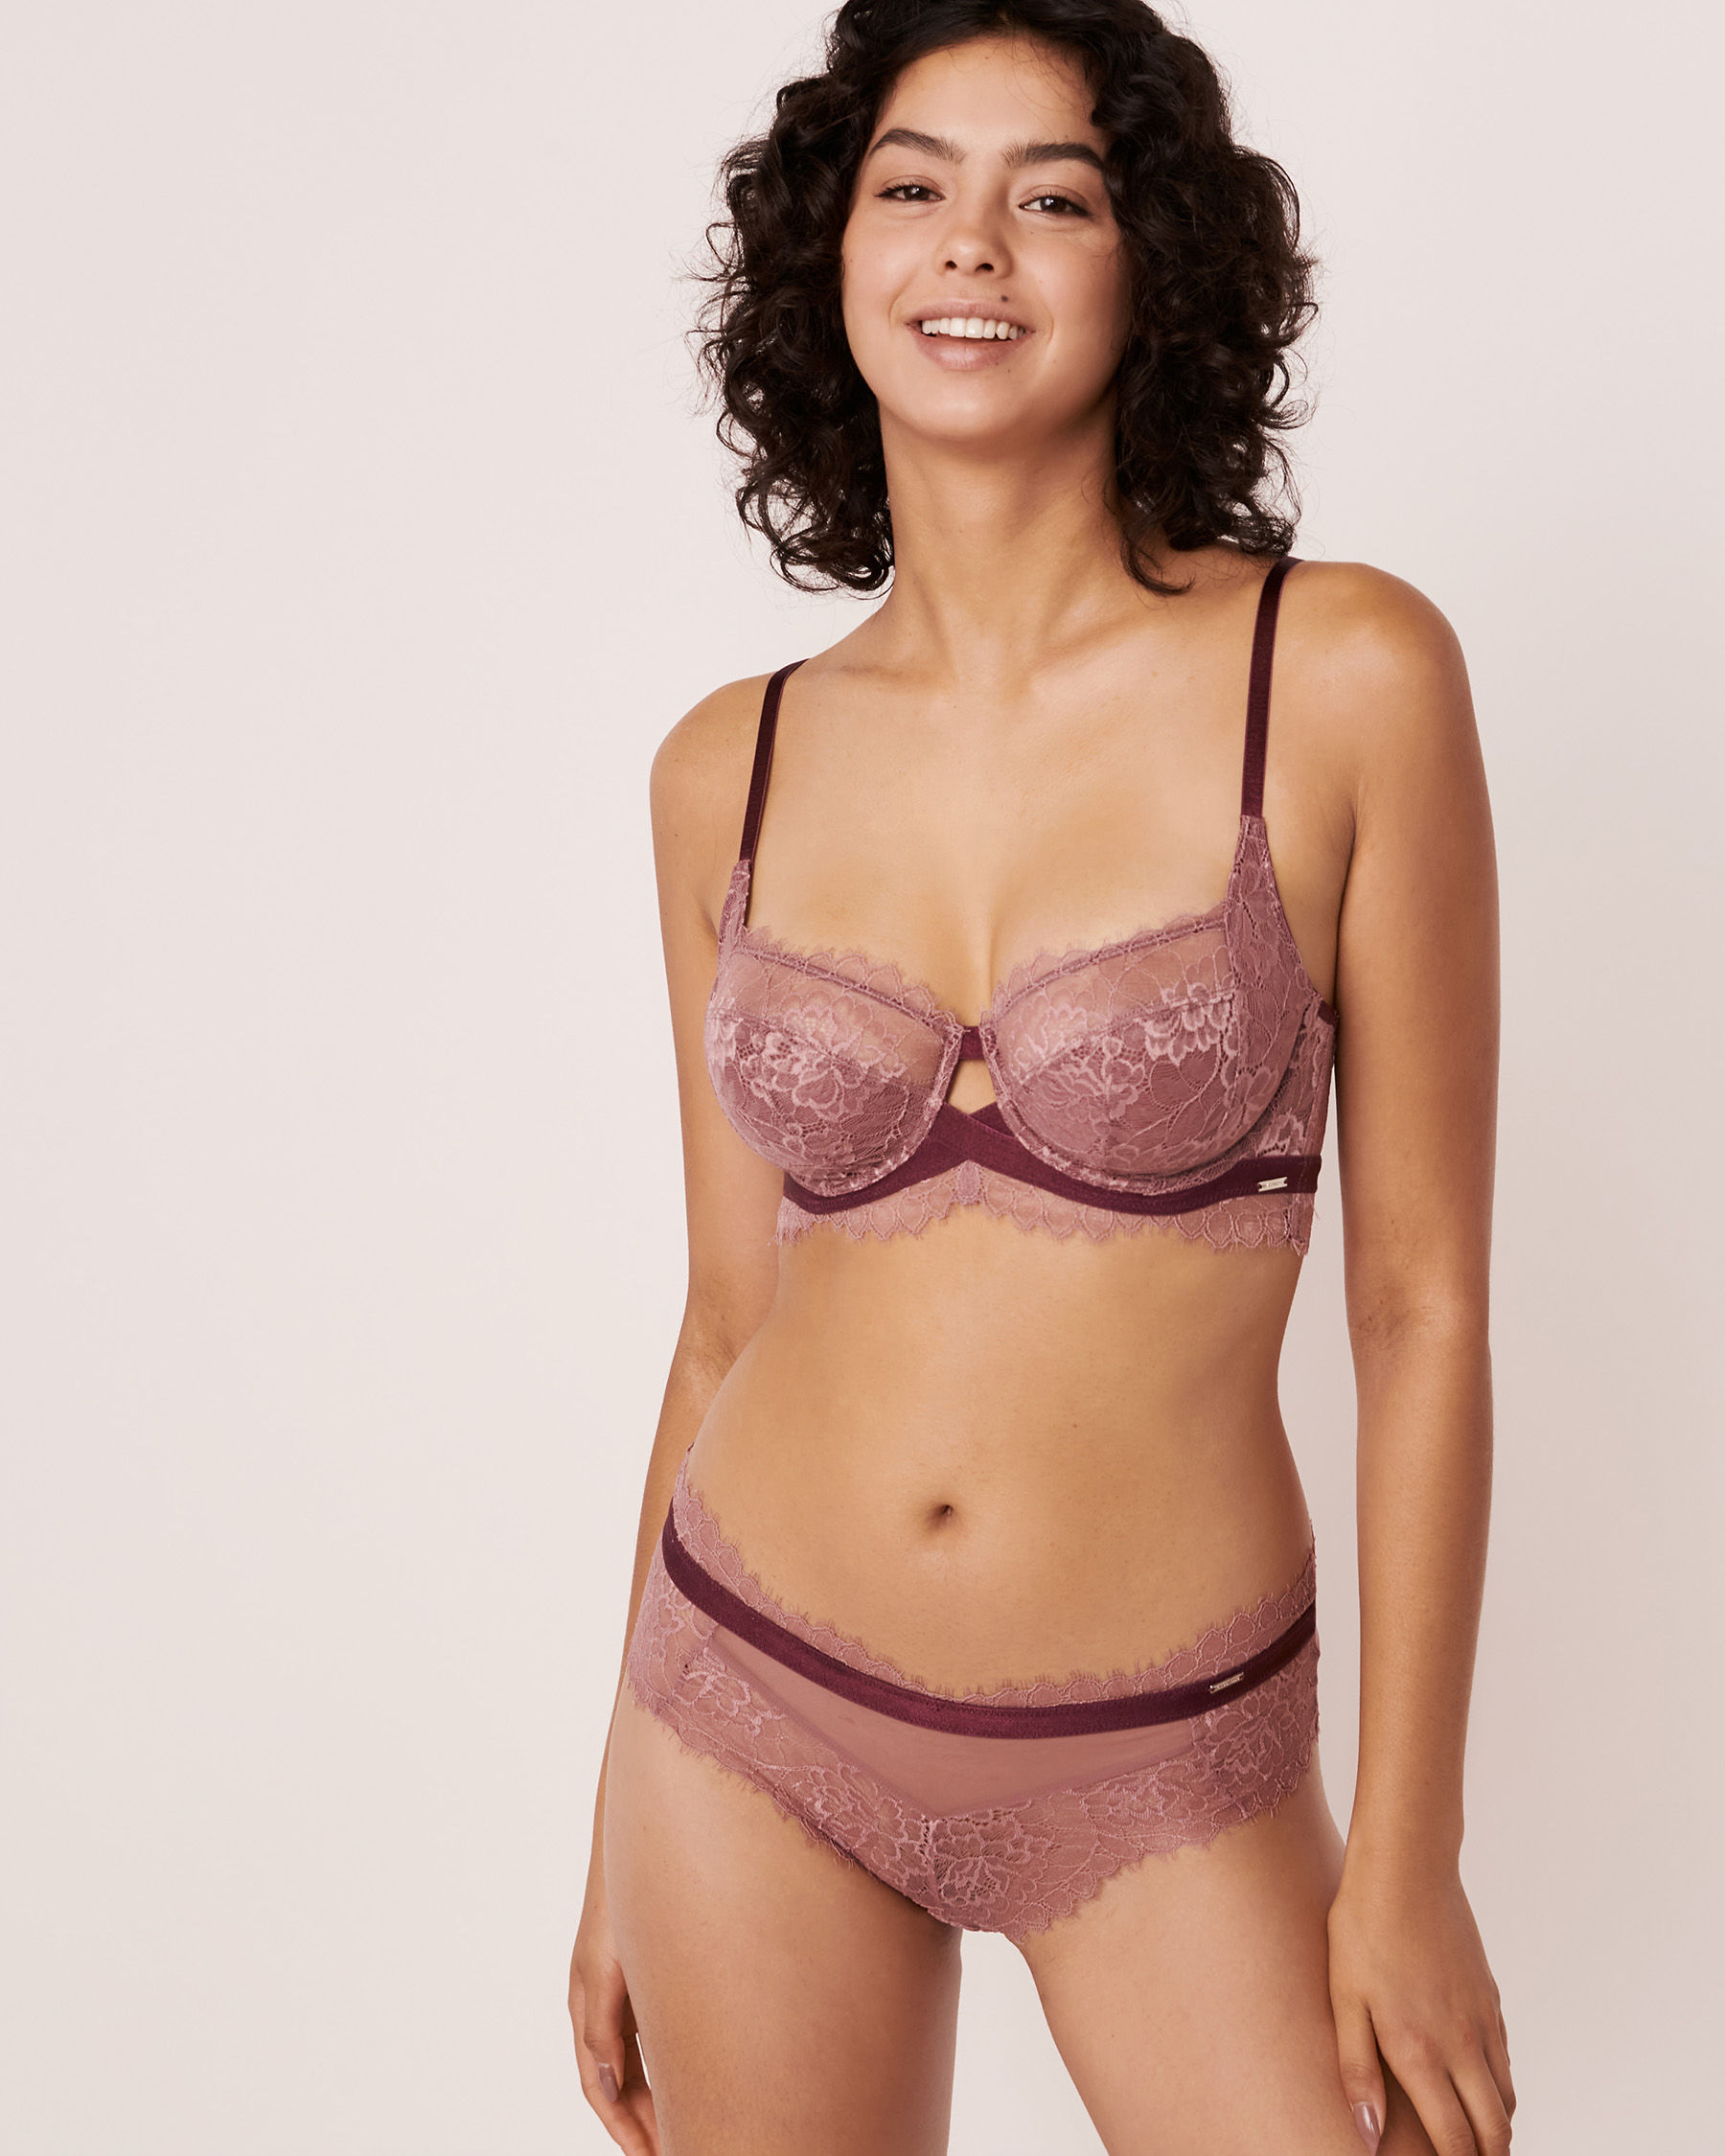 Unlined Full Coverage Bra - Old pink